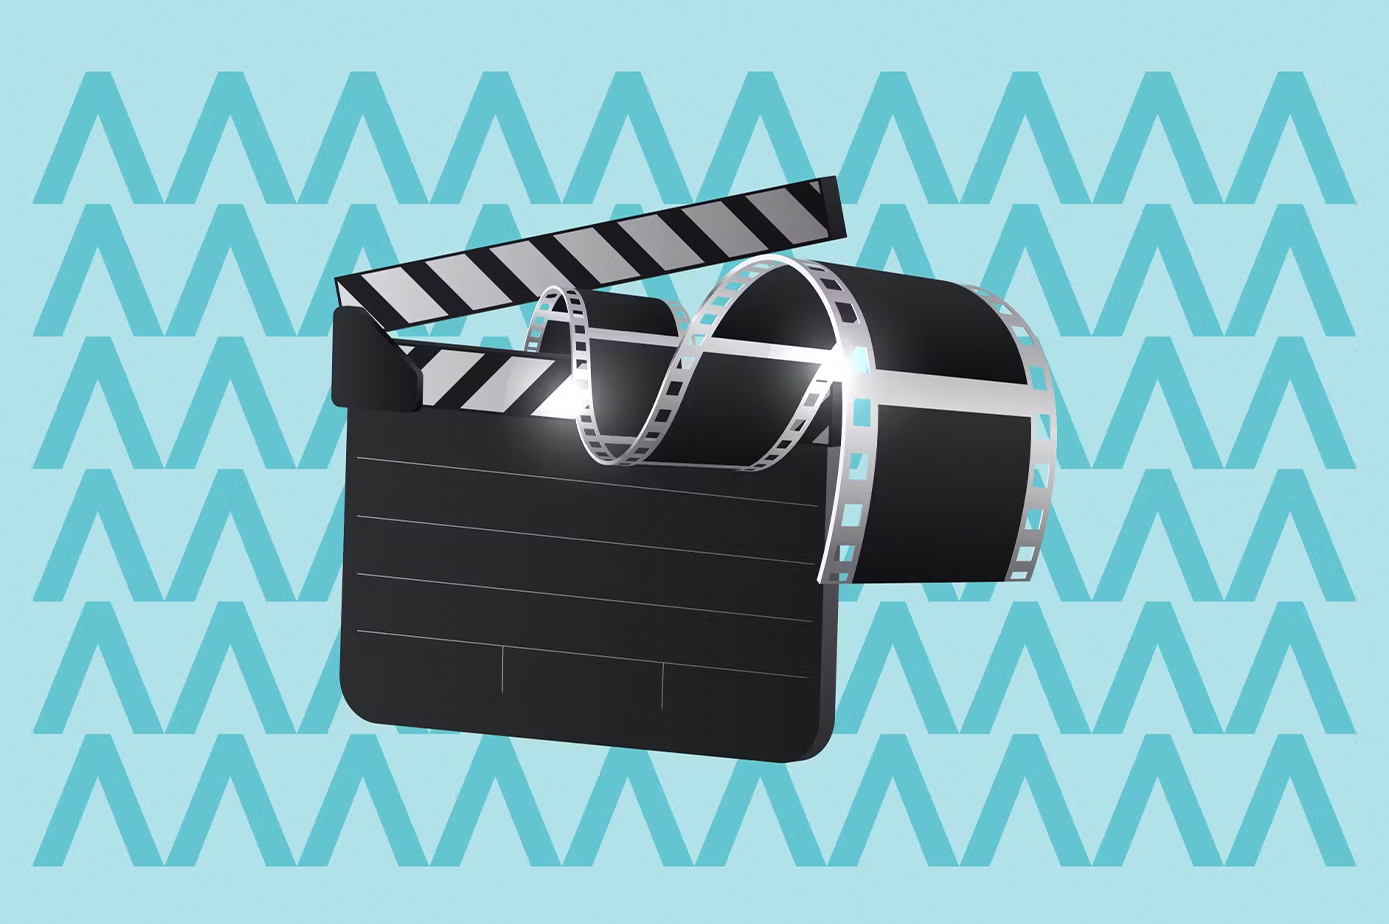 Animation of a vintage movie clapper board